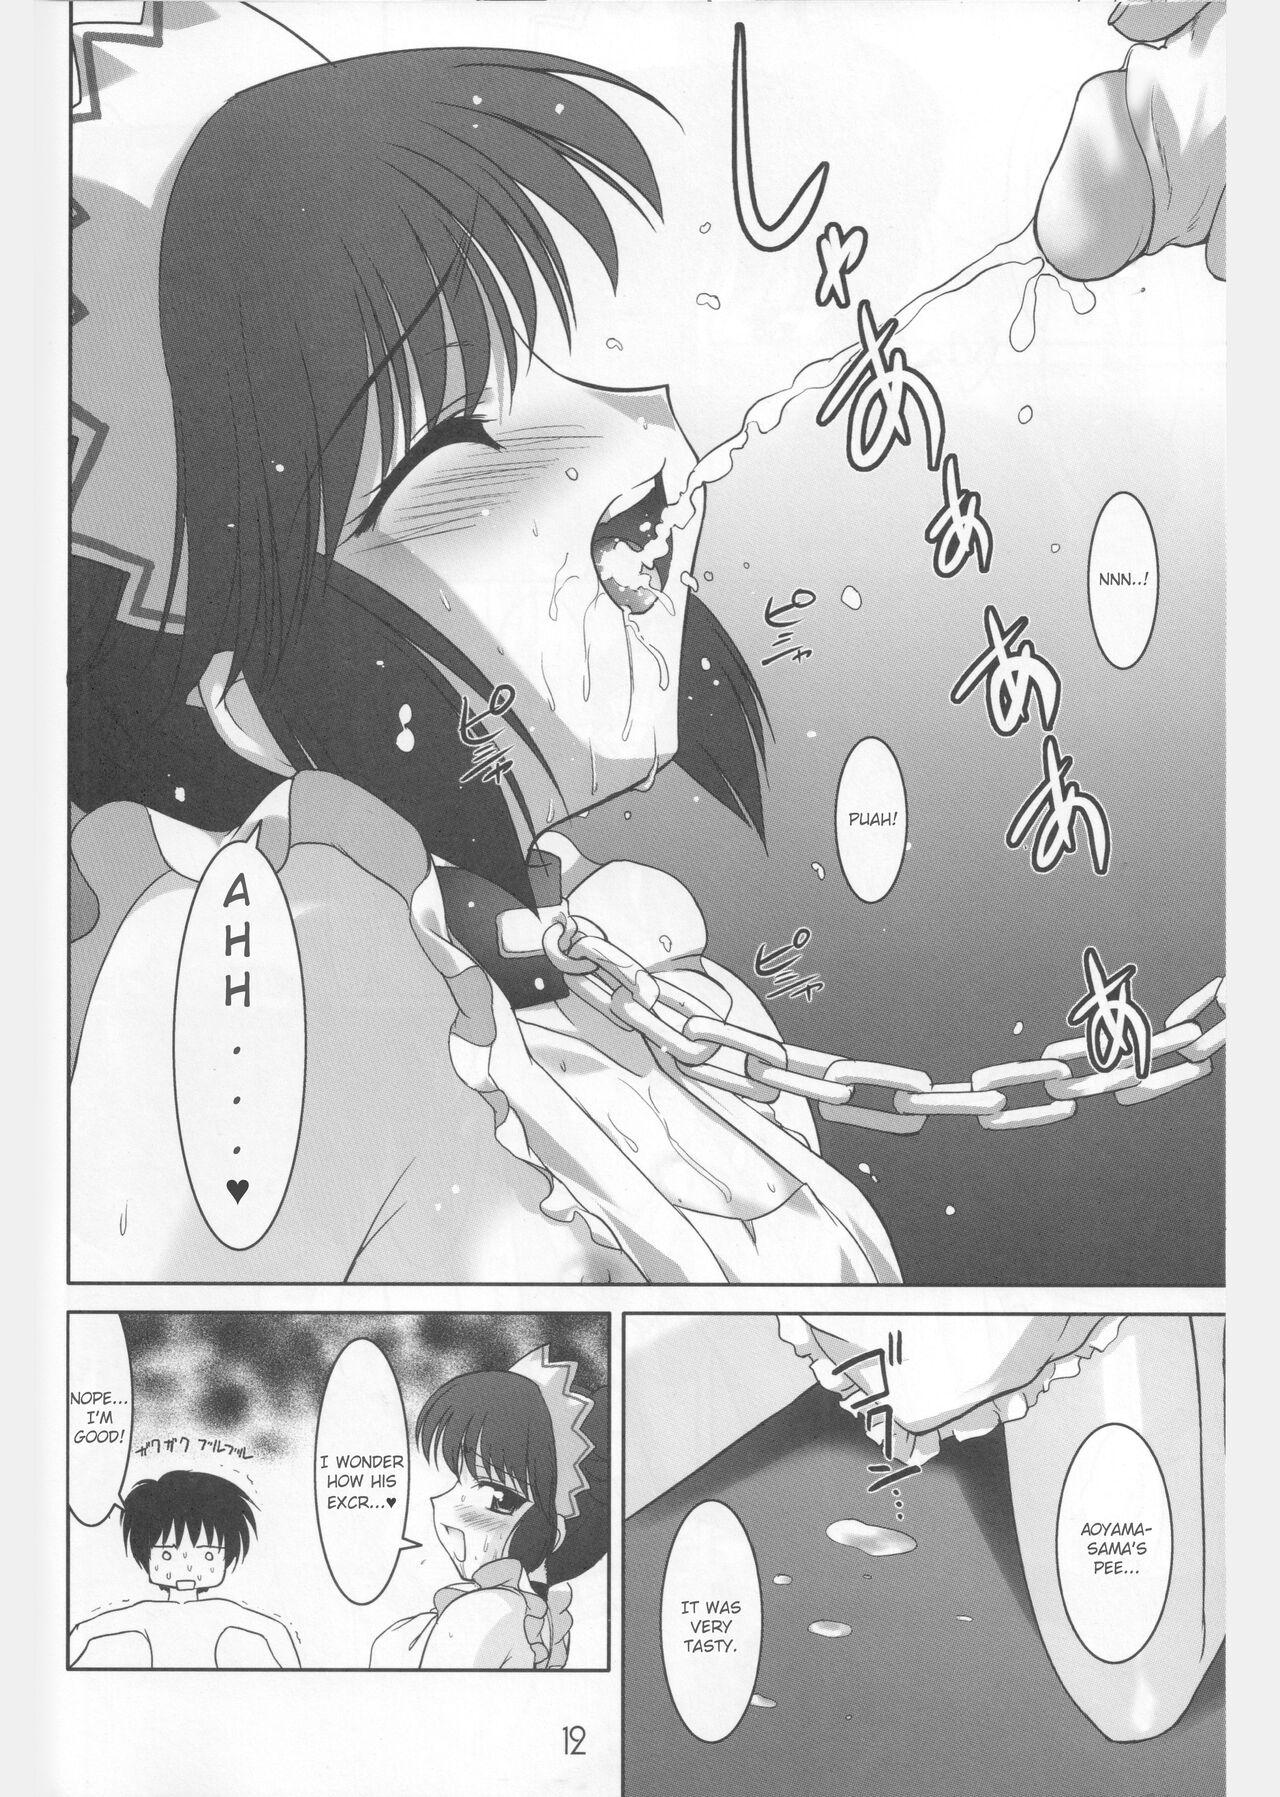 Neighbor Ring My Bell - MAGICALDELTA.COM - Tokyo mew mew | mew mew power Secret - Page 13